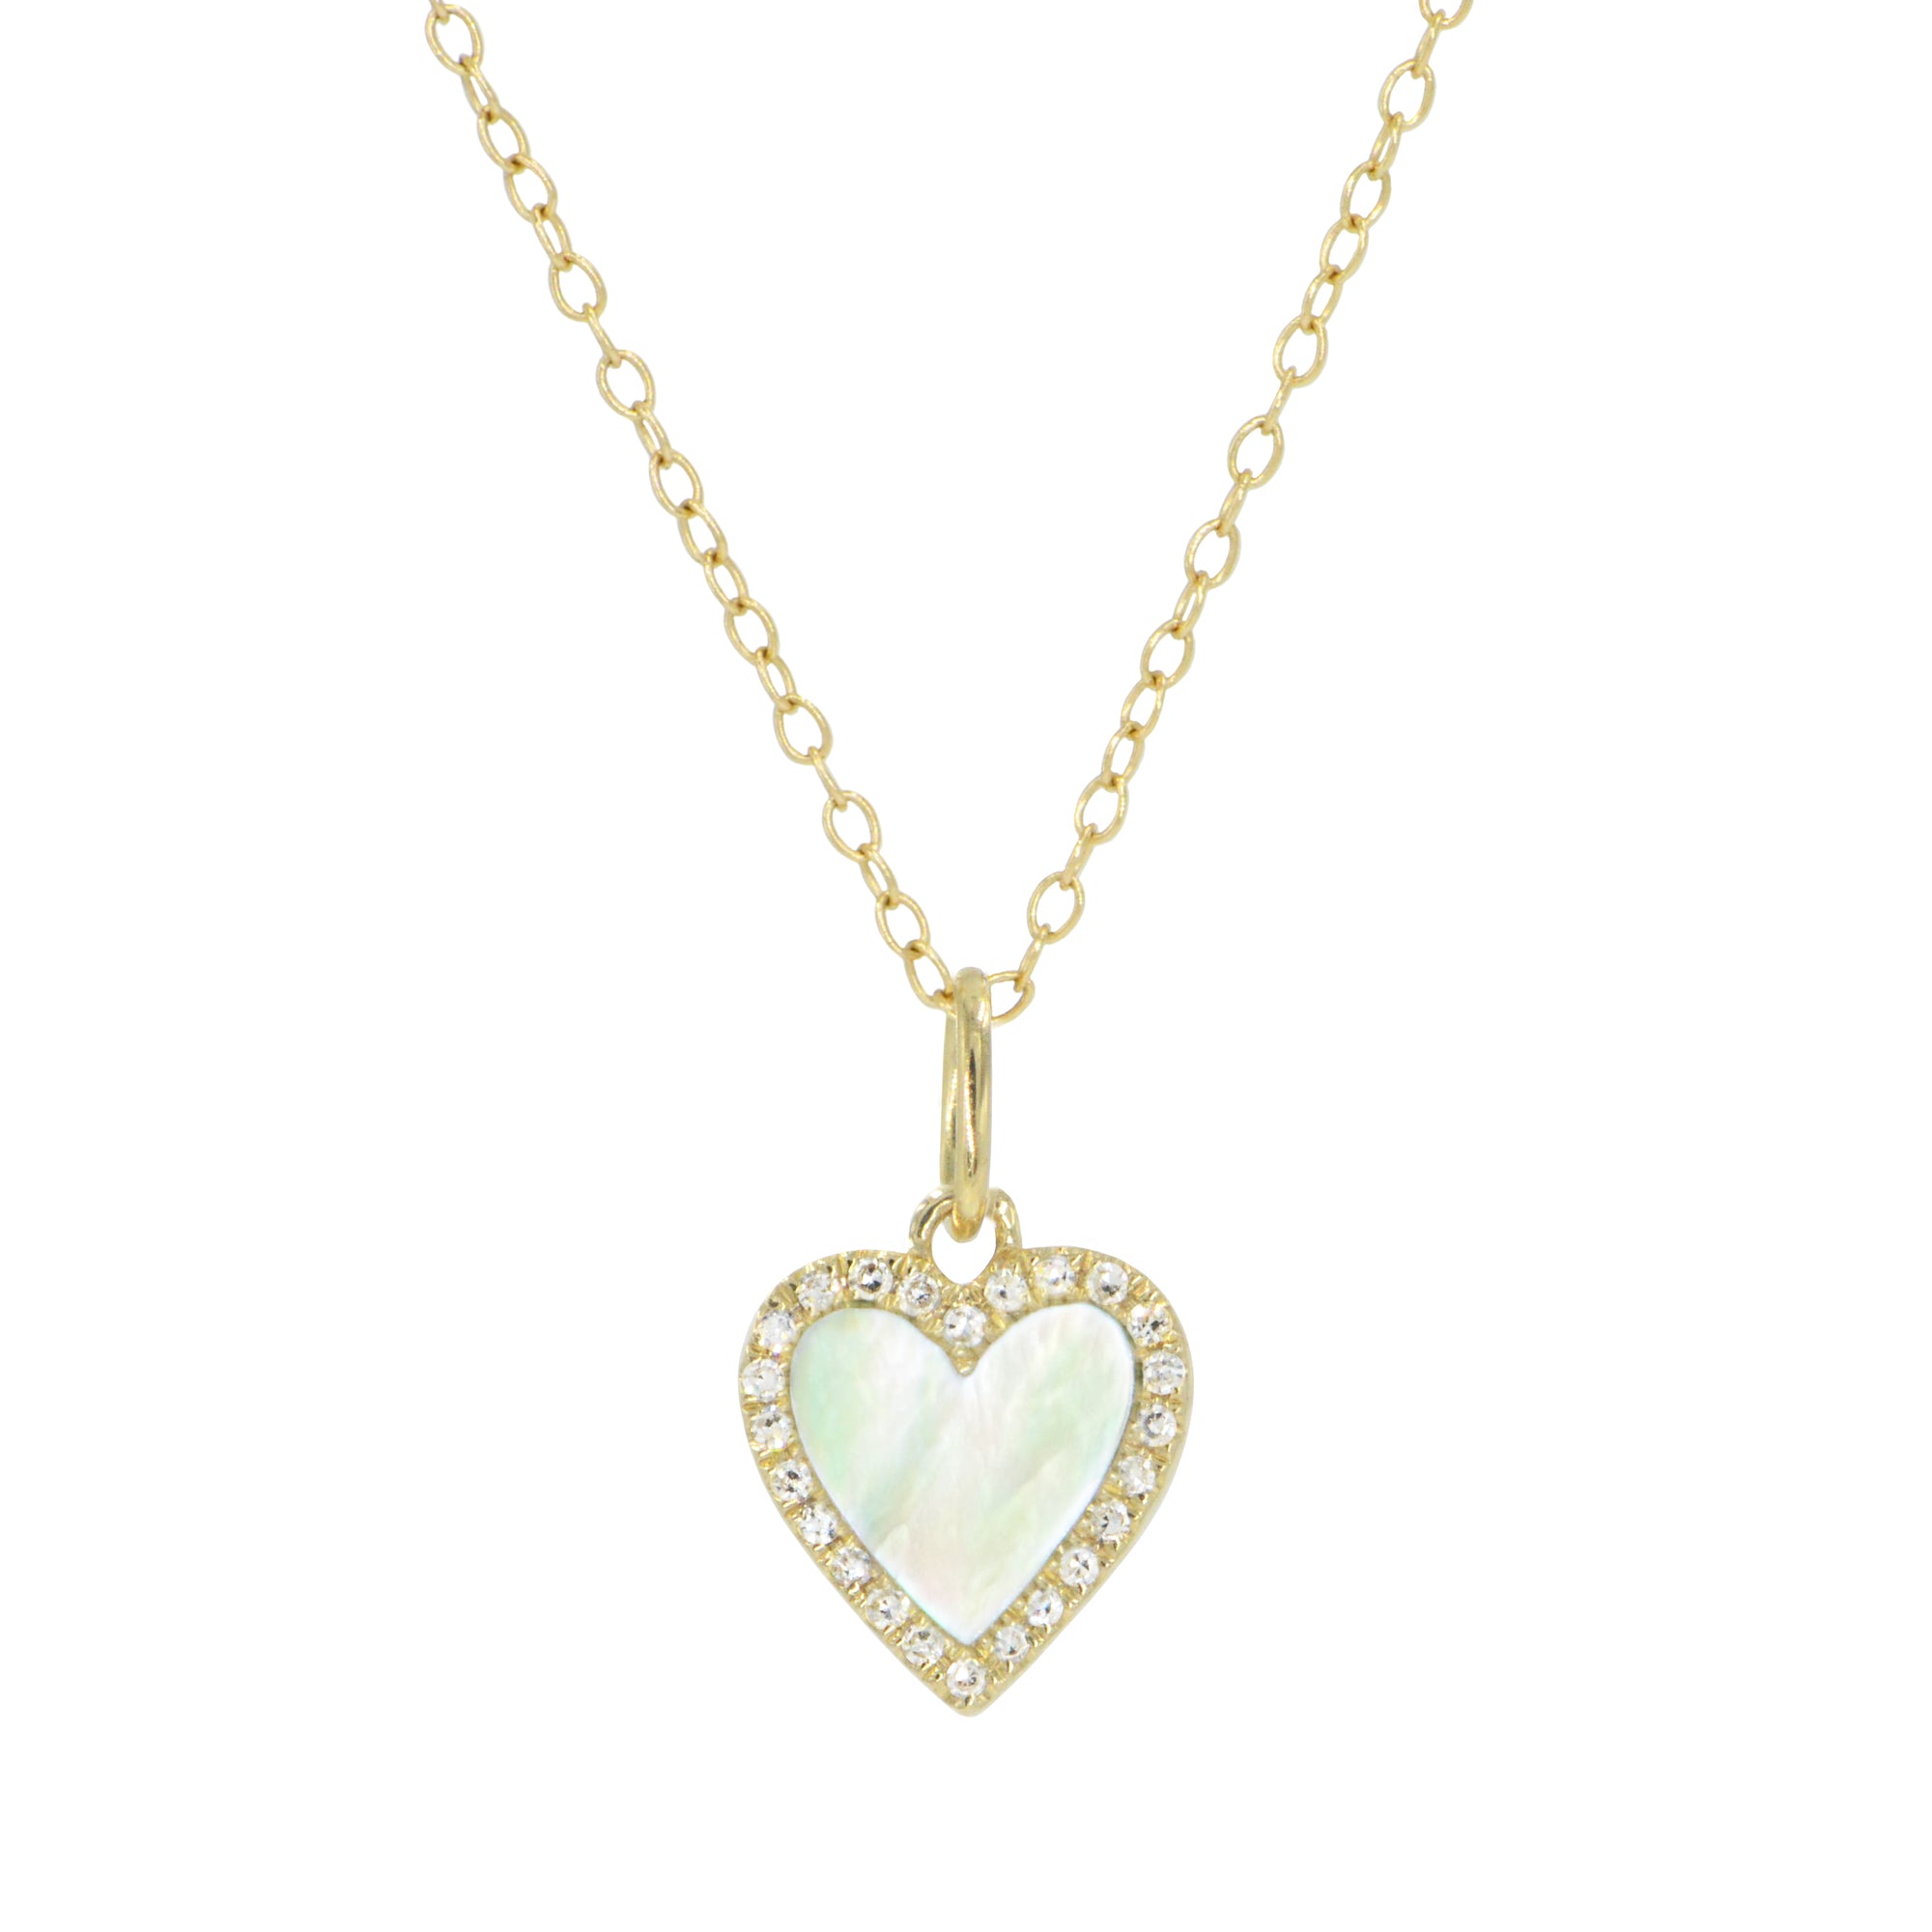 pearl heart necklace with diamonds mini on simple chain